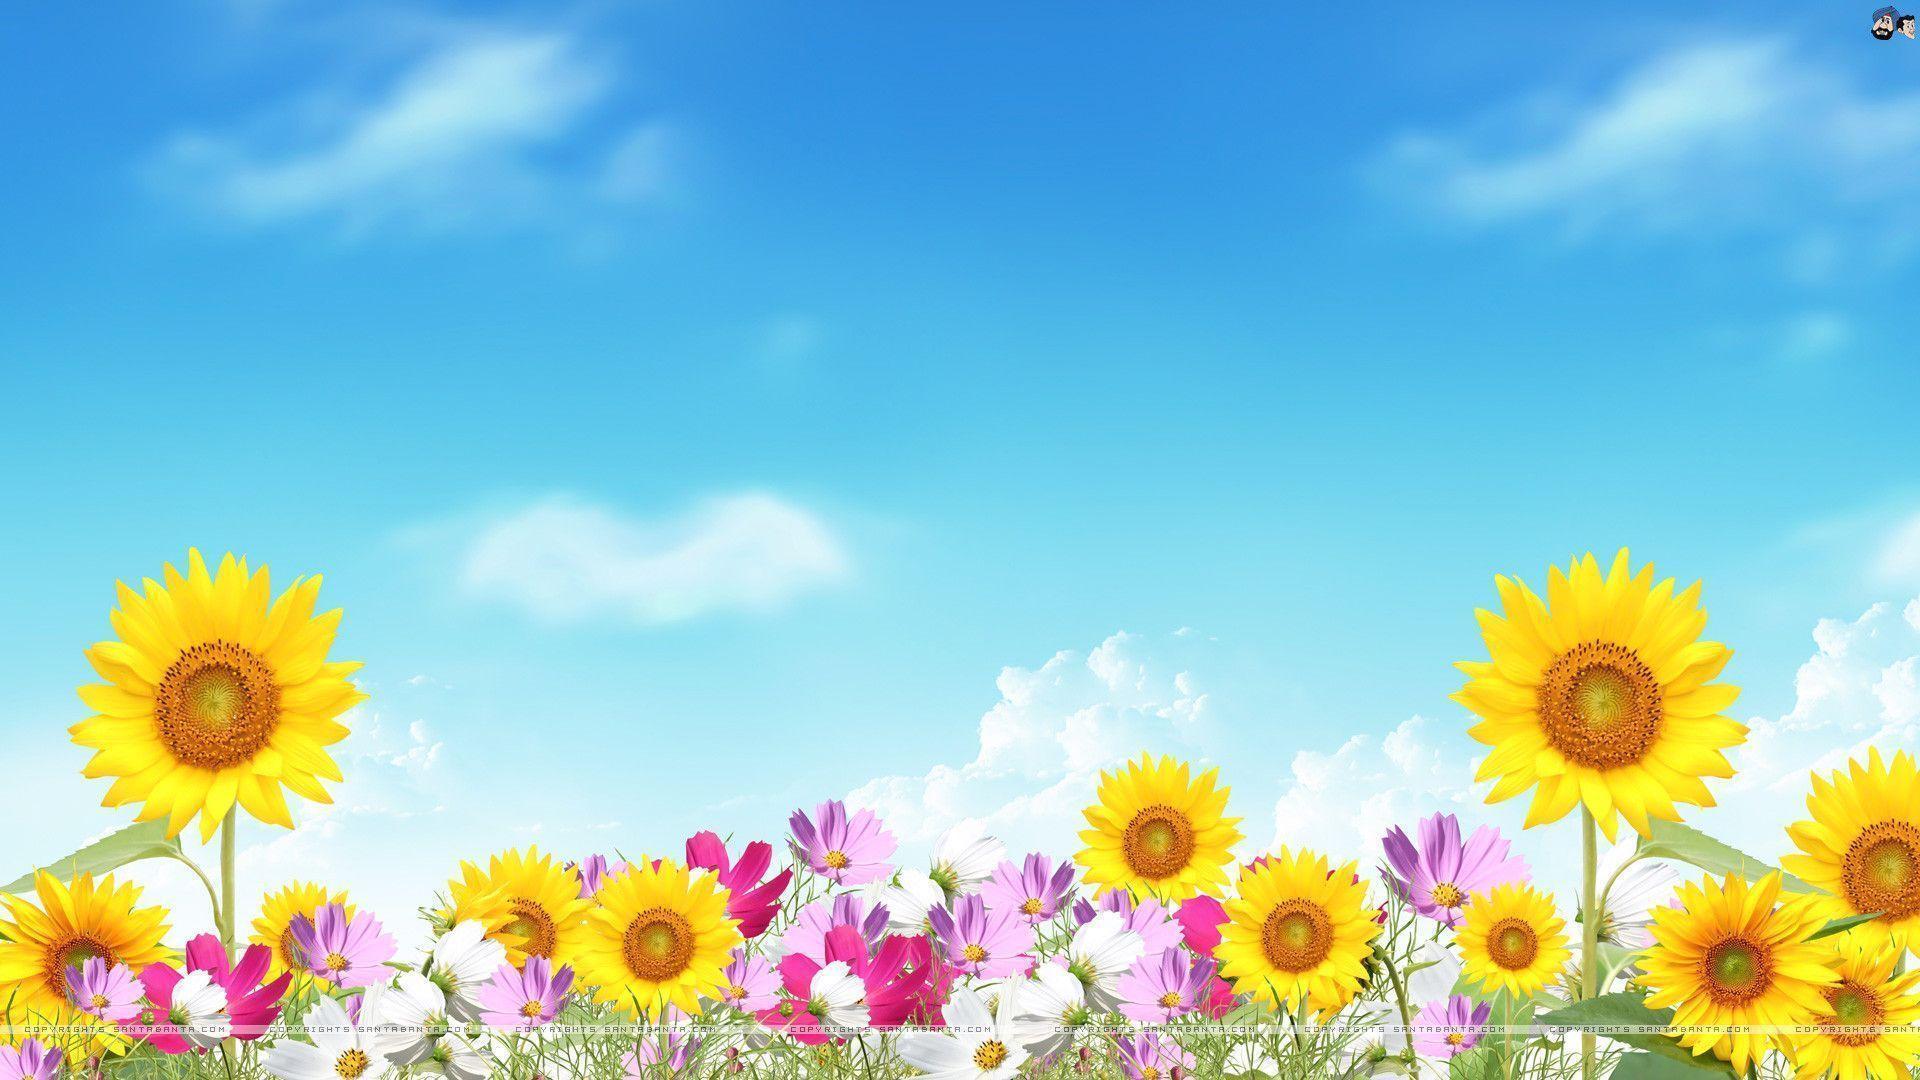 Summer Picture Image 6 HD Wallpaper. Hdimges